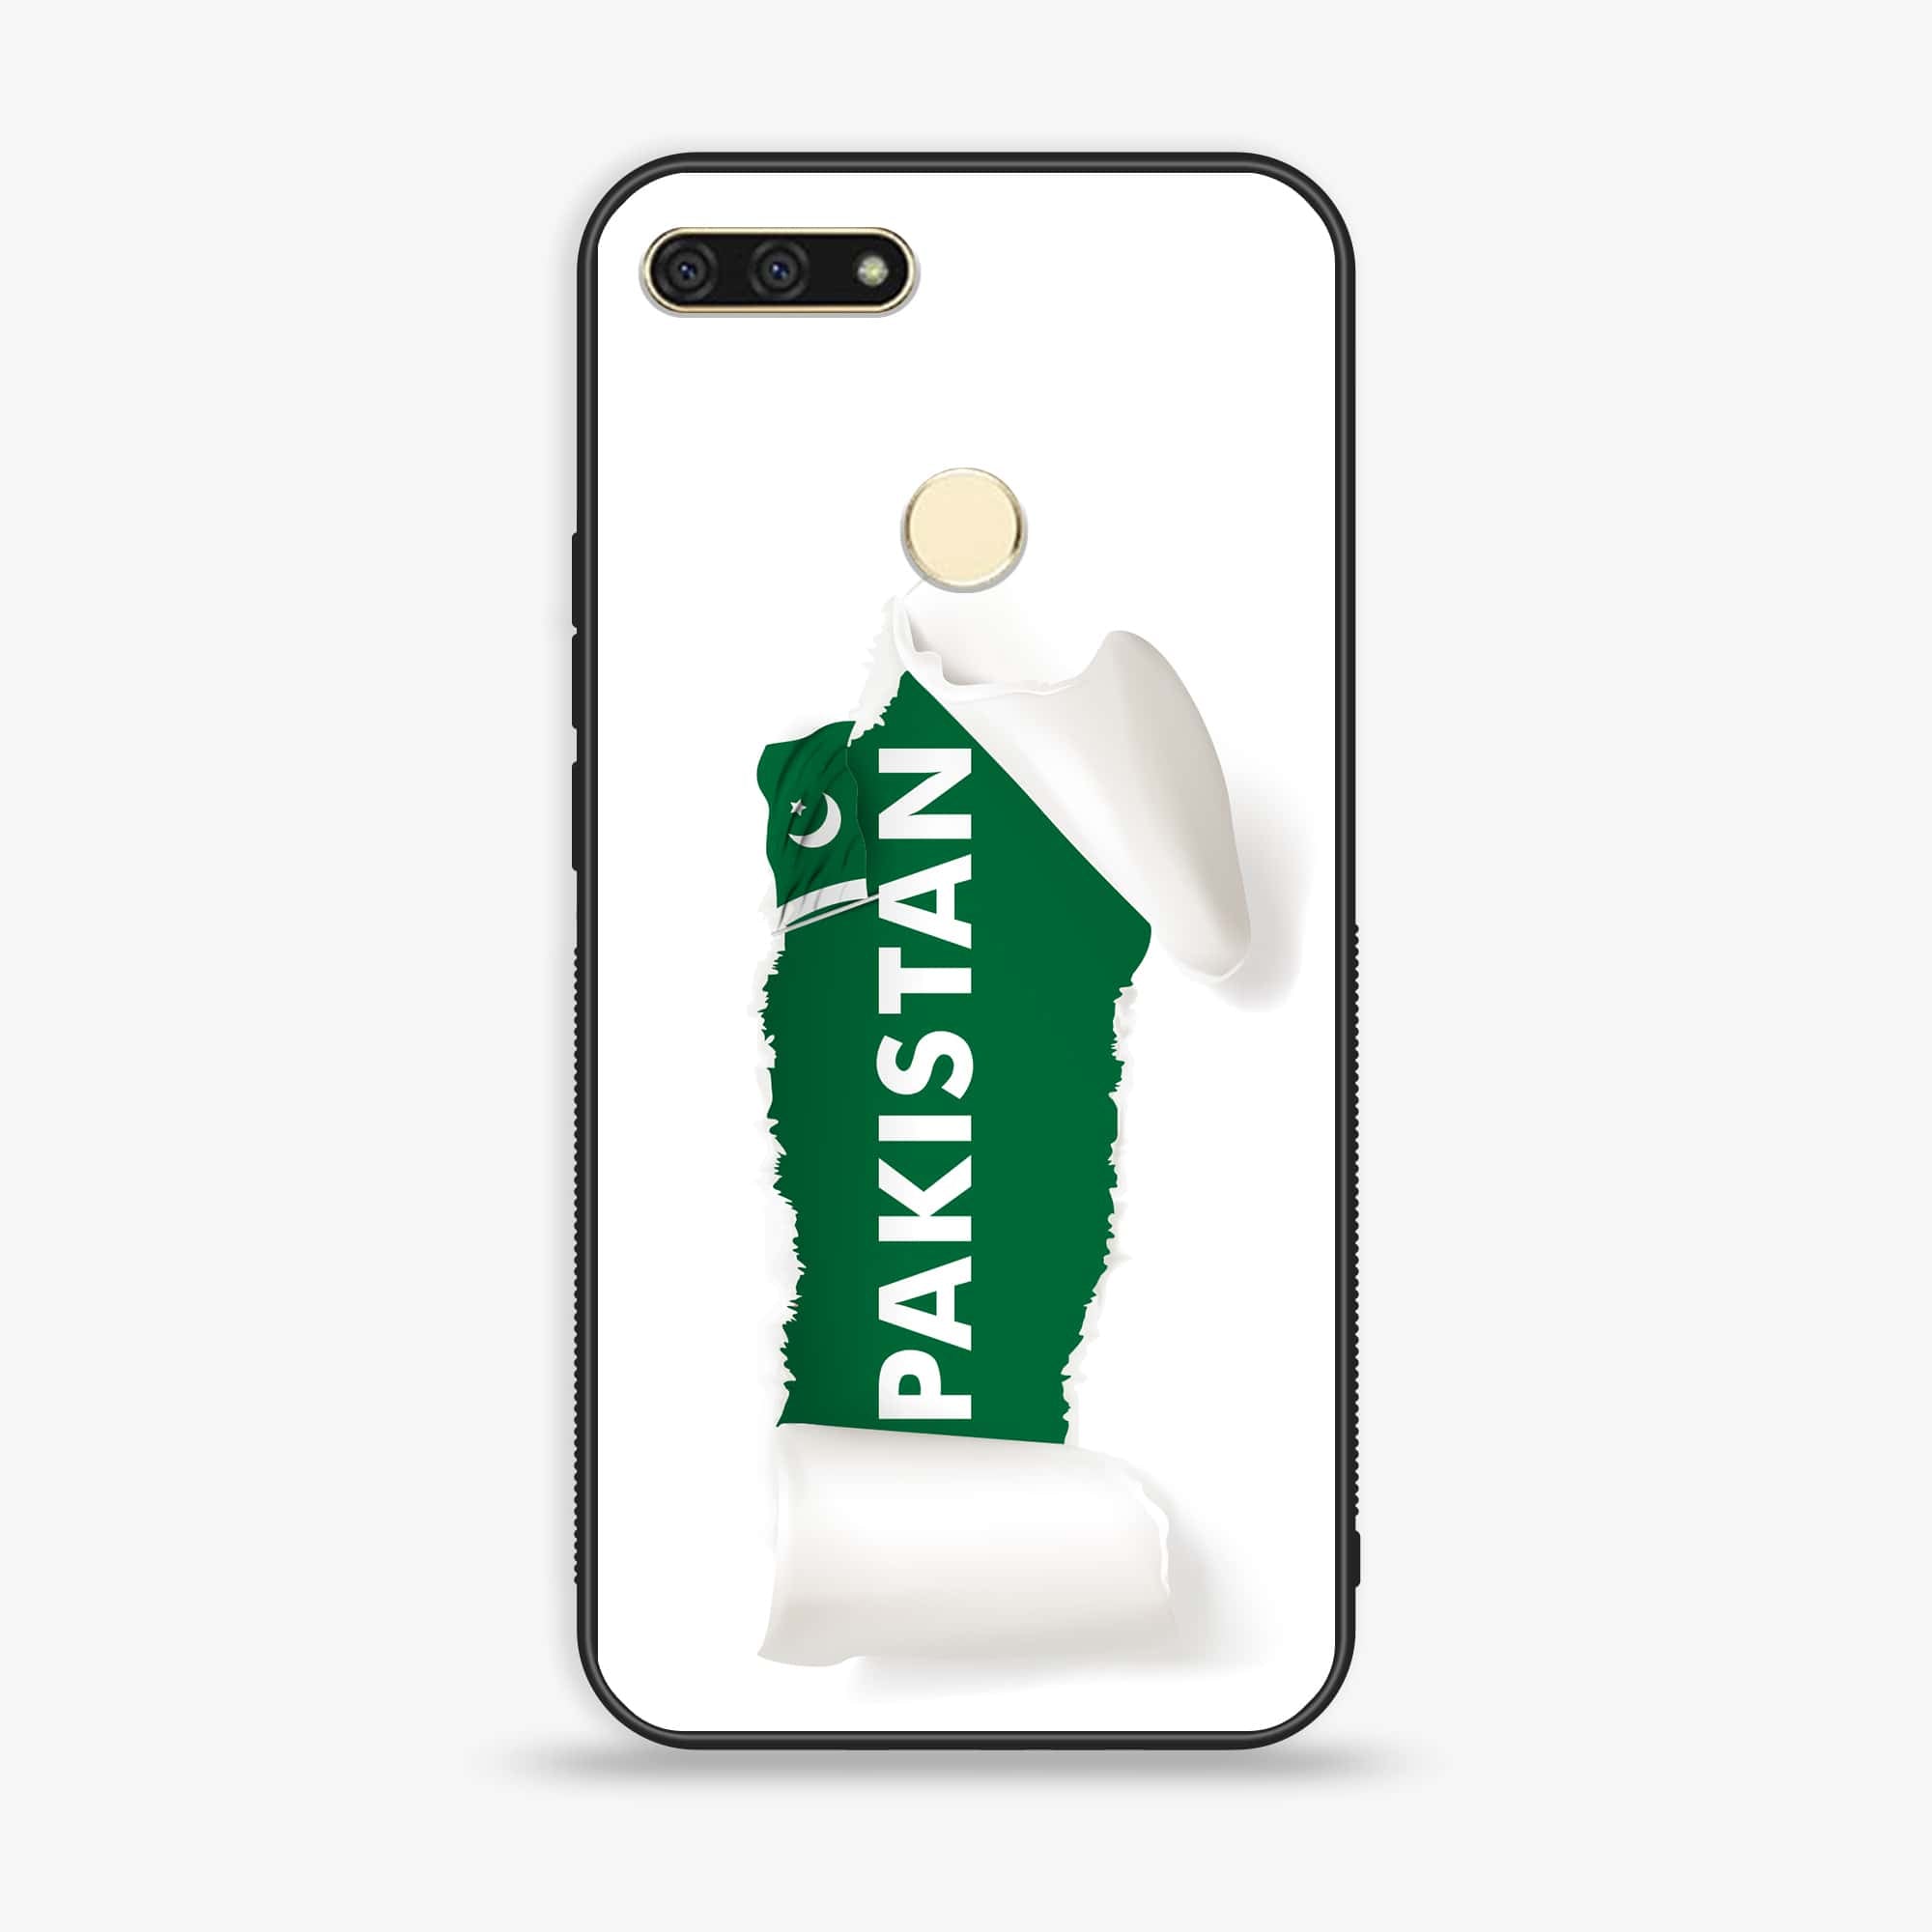 Huawei Y6 2018/Honor Play 7A - Pakistani Flag Series - Premium Printed Glass soft Bumper shock Proof Case